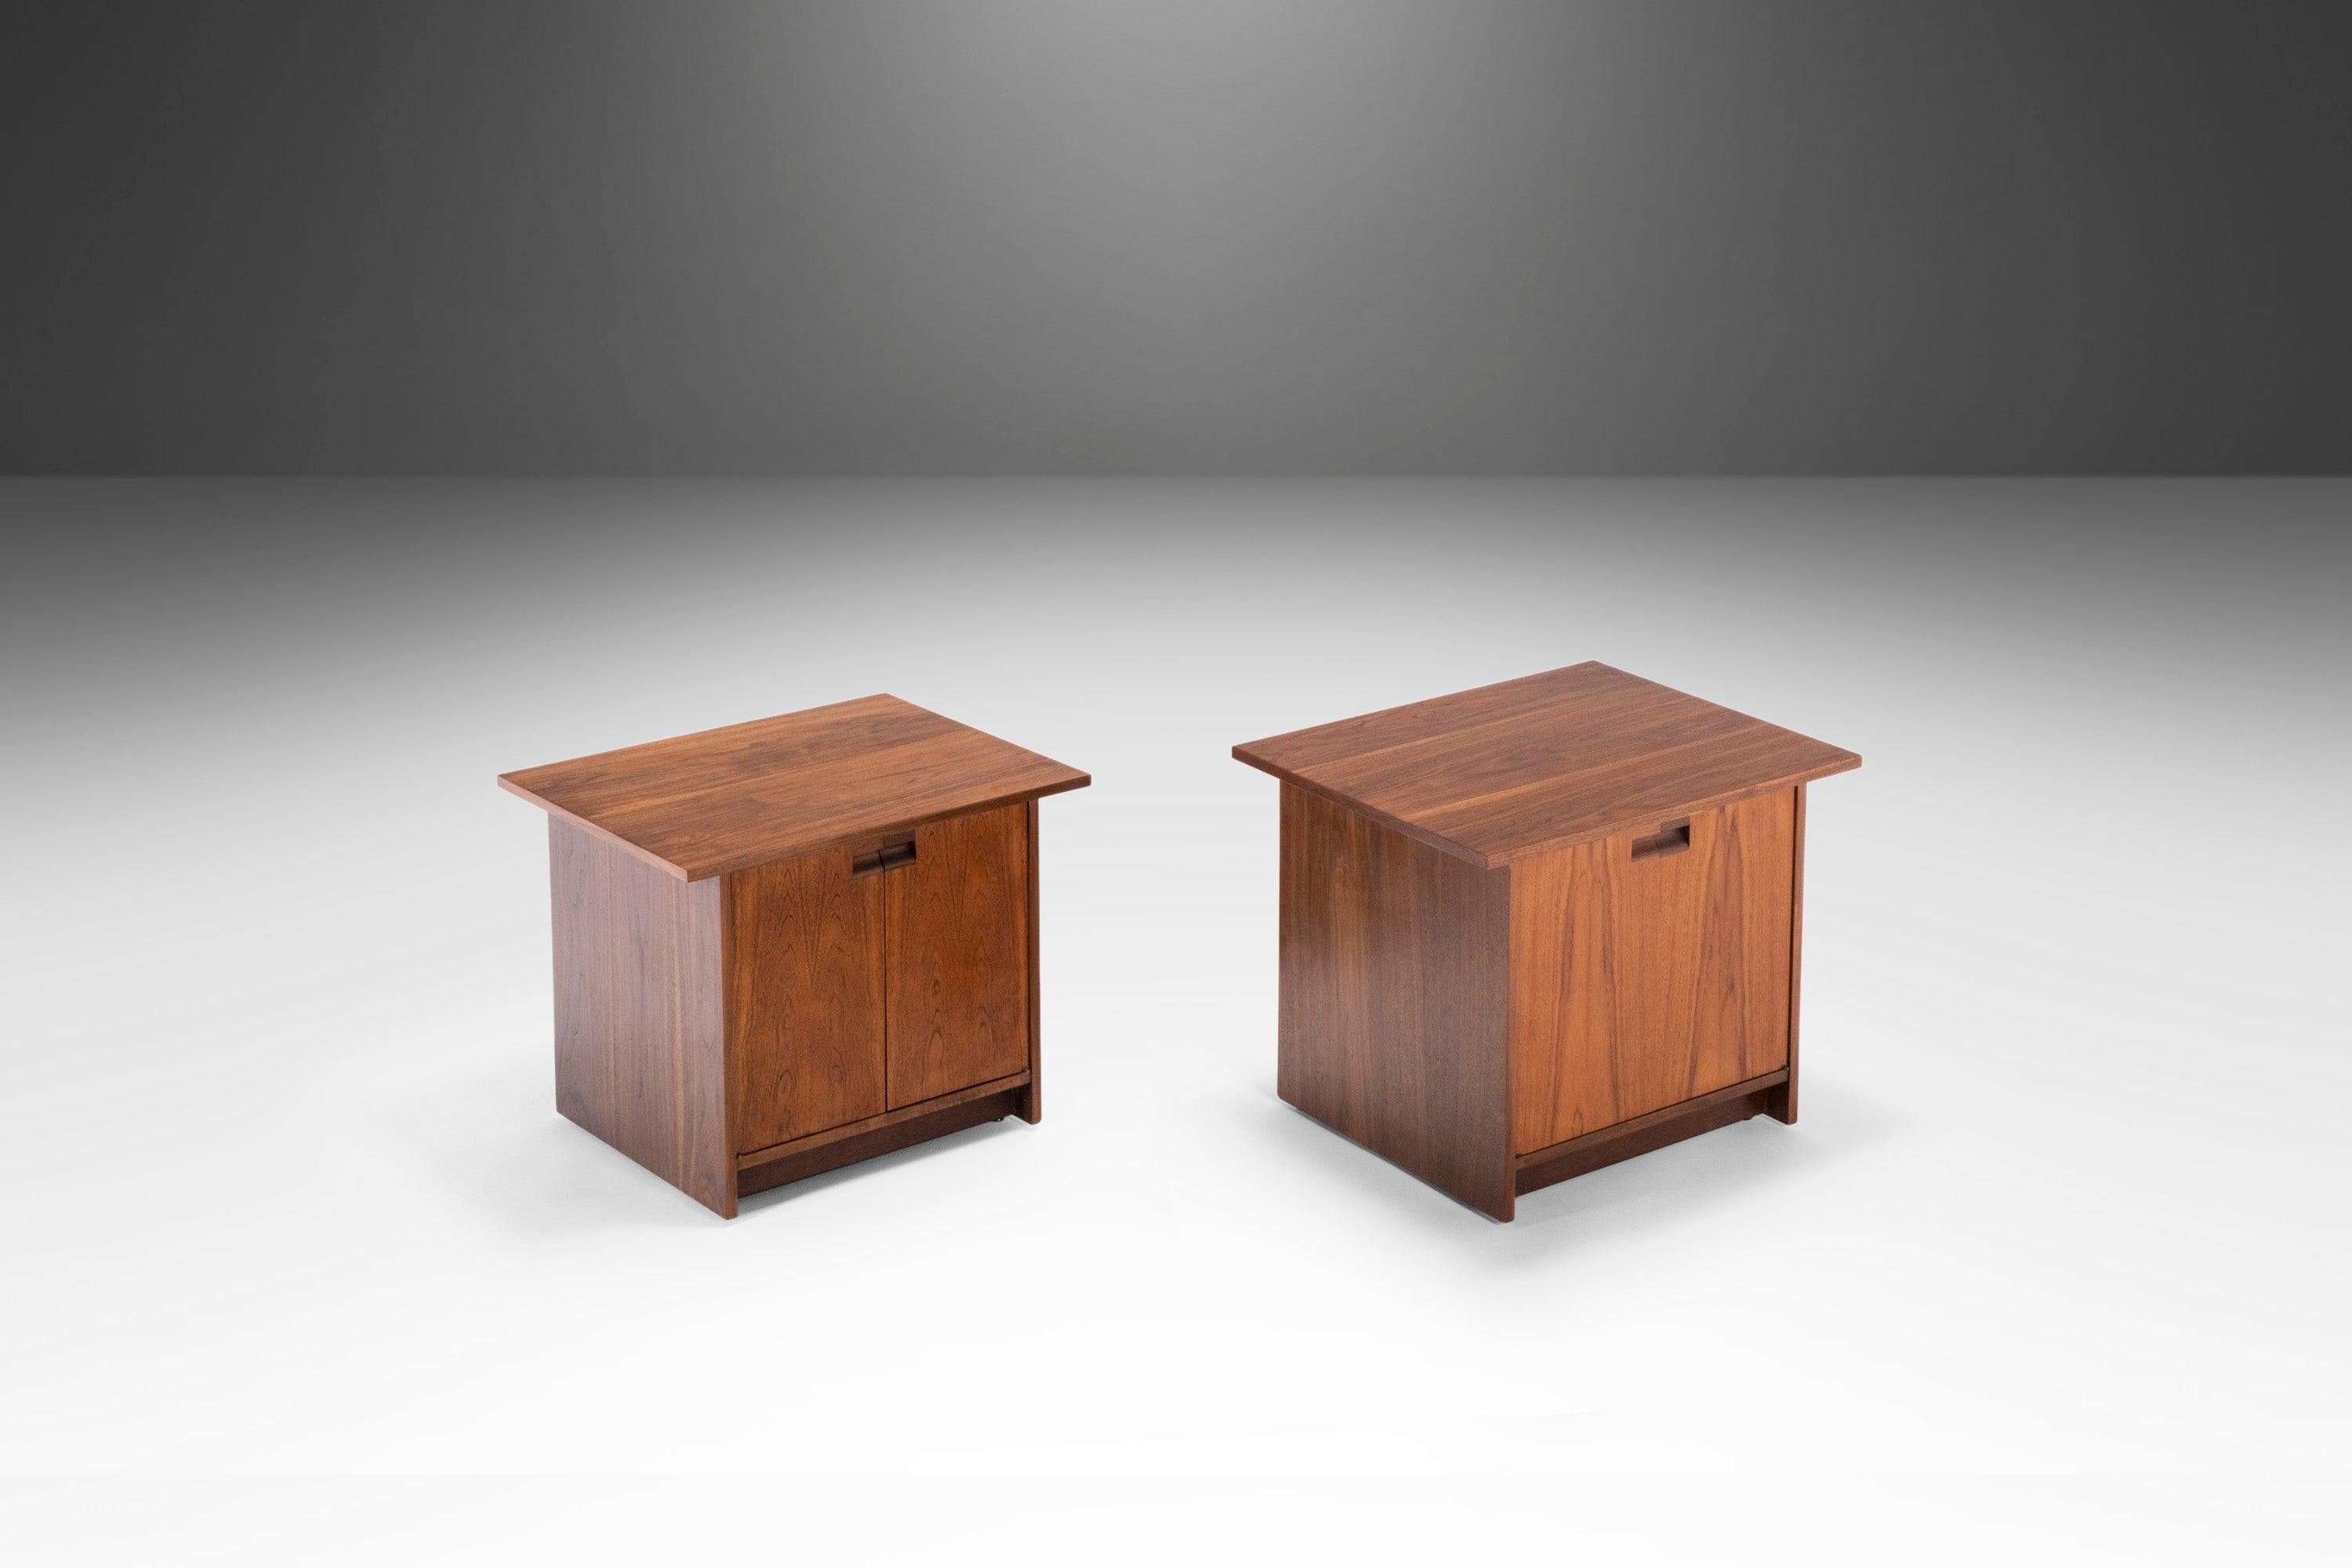 American Set of Two (2) End Tables / Bedside Tables by Milo Baughman for Directional 1960